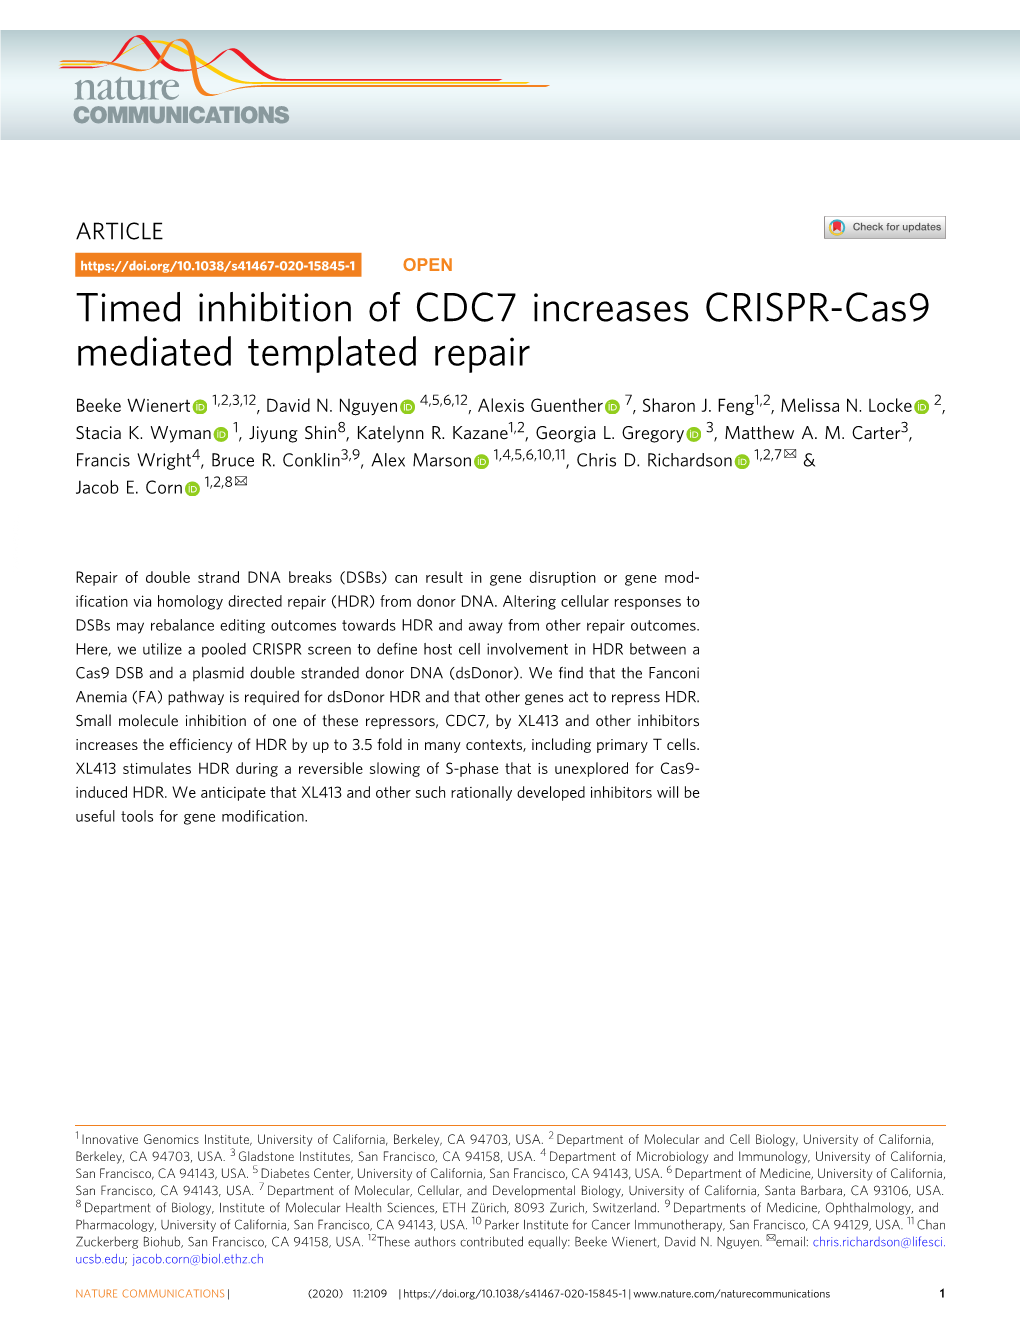 Timed Inhibition of CDC7 Increases CRISPR-Cas9 Mediated Templated Repair